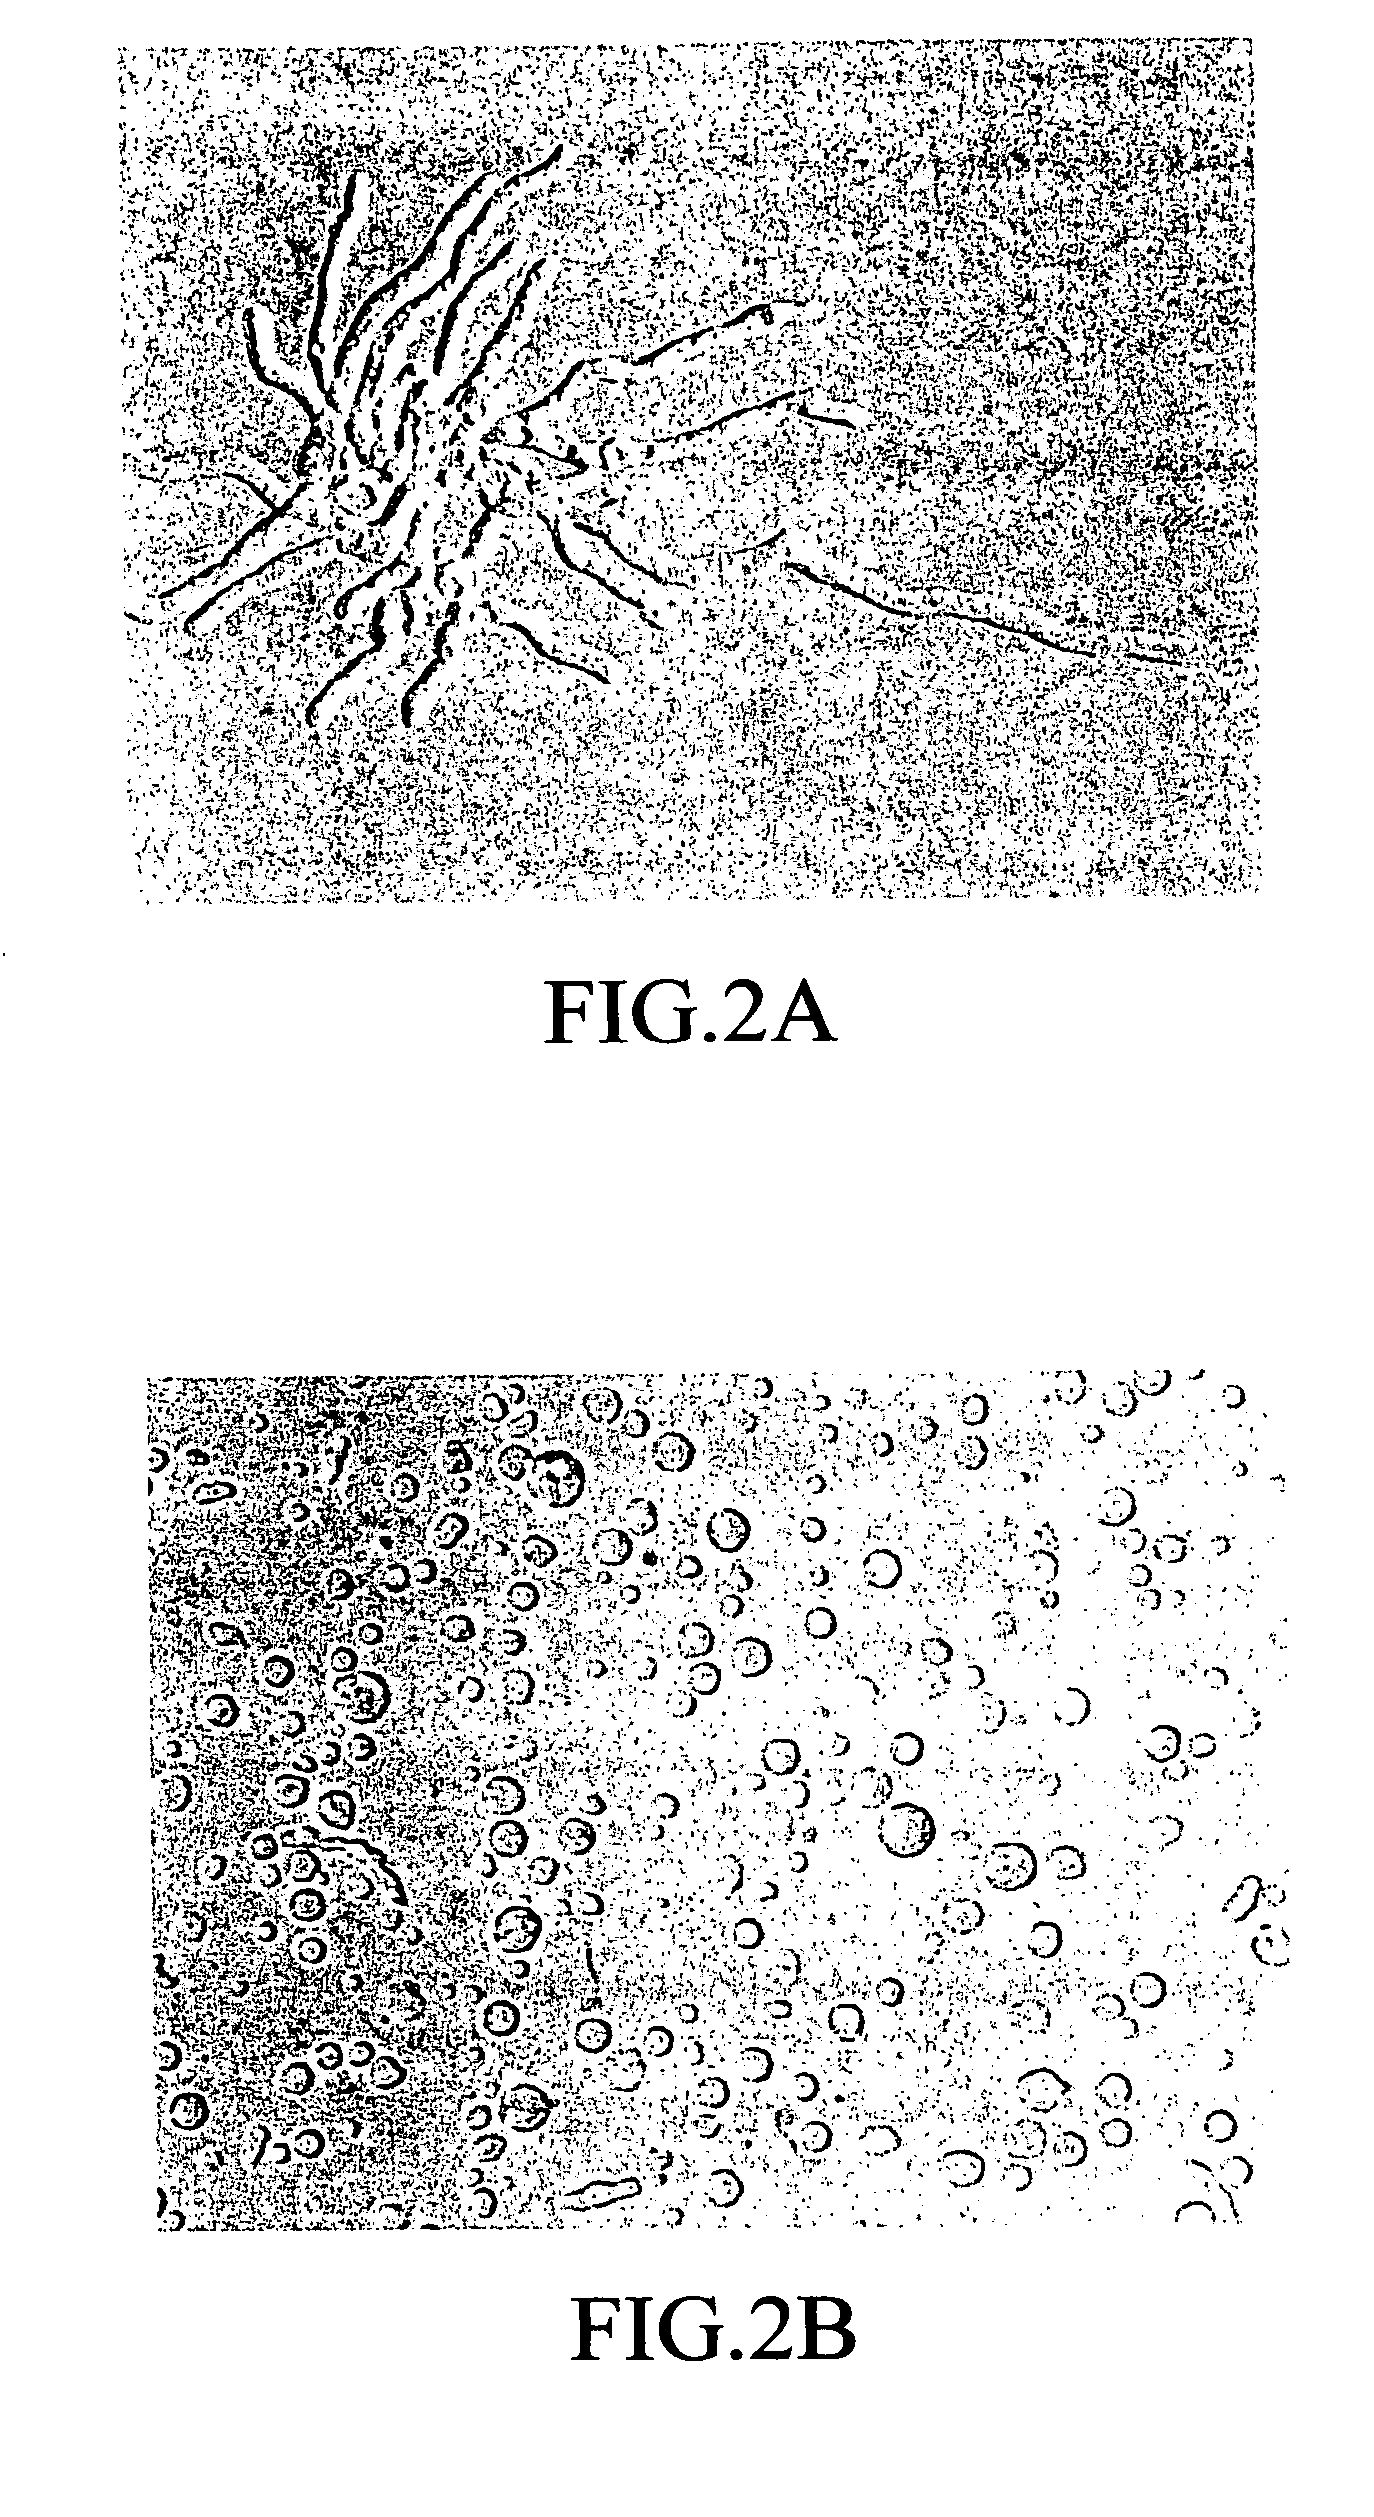 Fungal antigens and process for producing the same